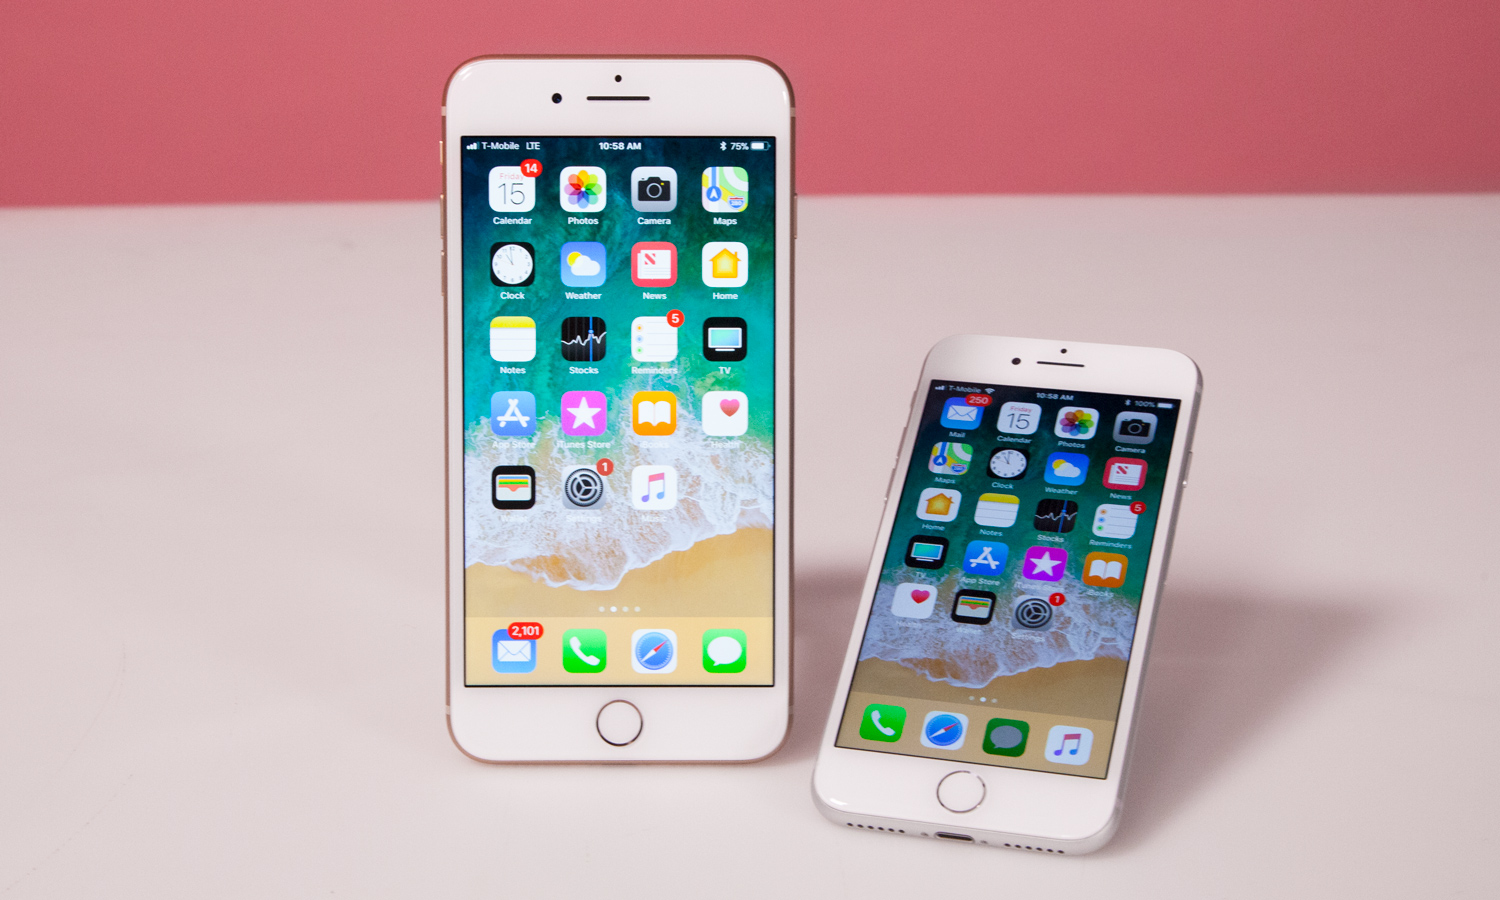 iPhone 8 Vs iPhone 8 Plus: What's The Difference?